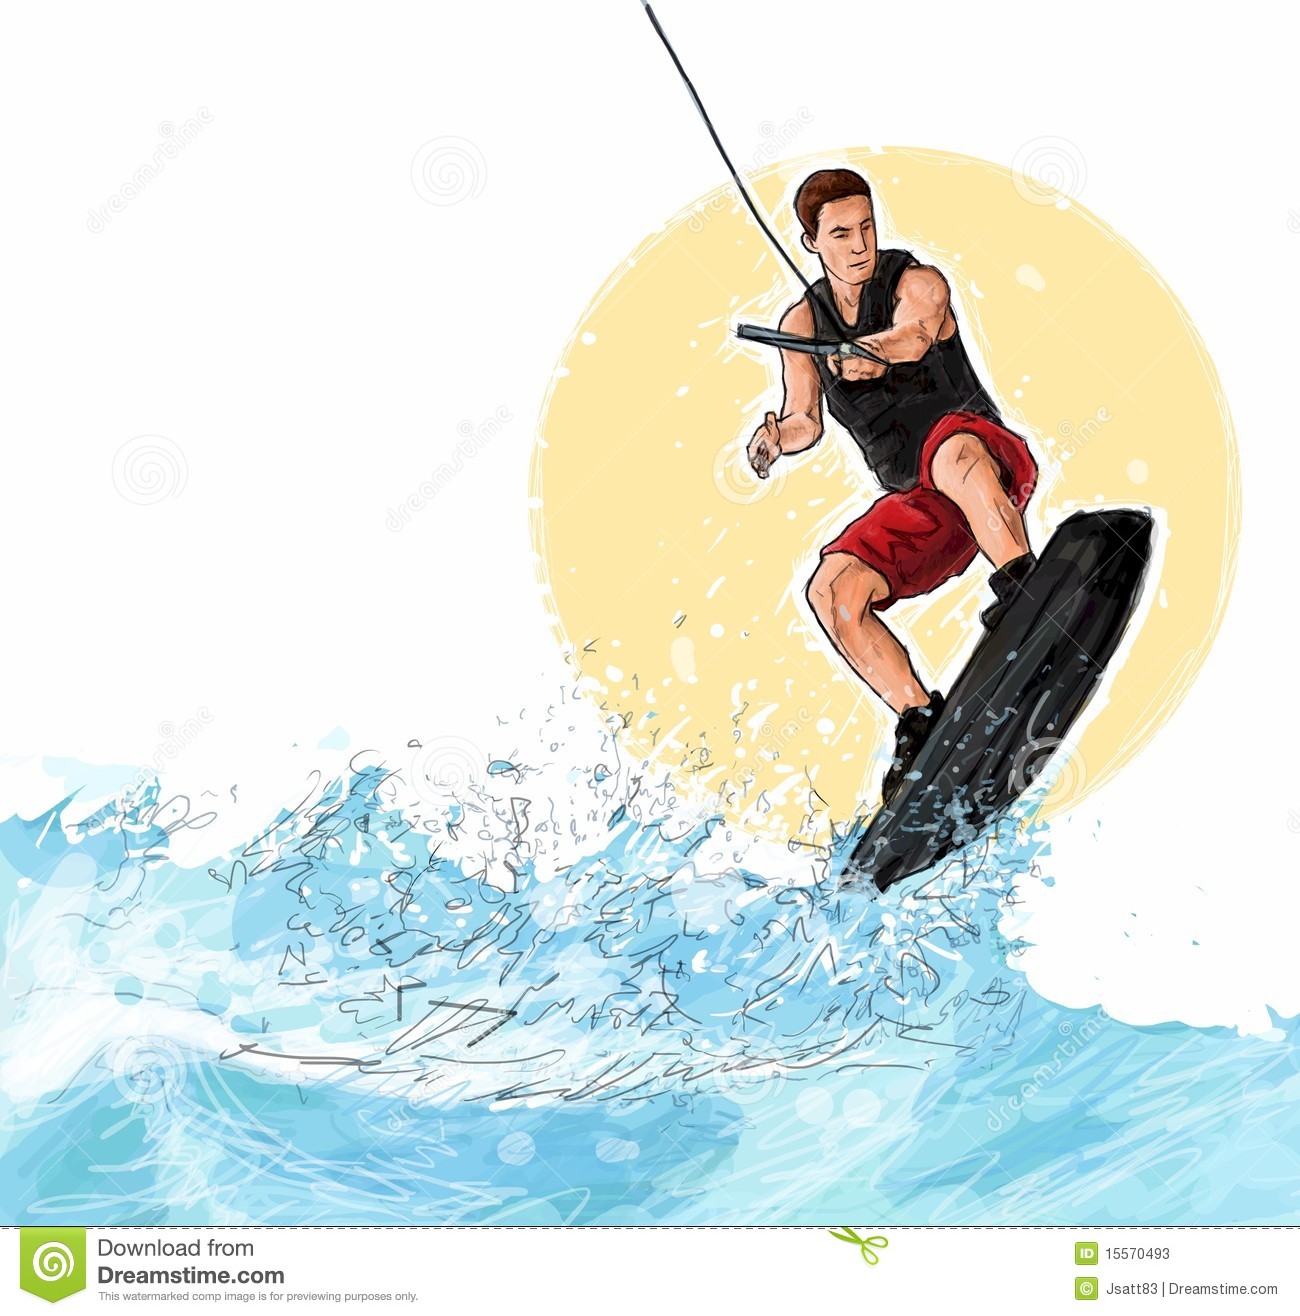 This Is A Hand Drawn Illustration Of An Athlete Wakeboarding  It